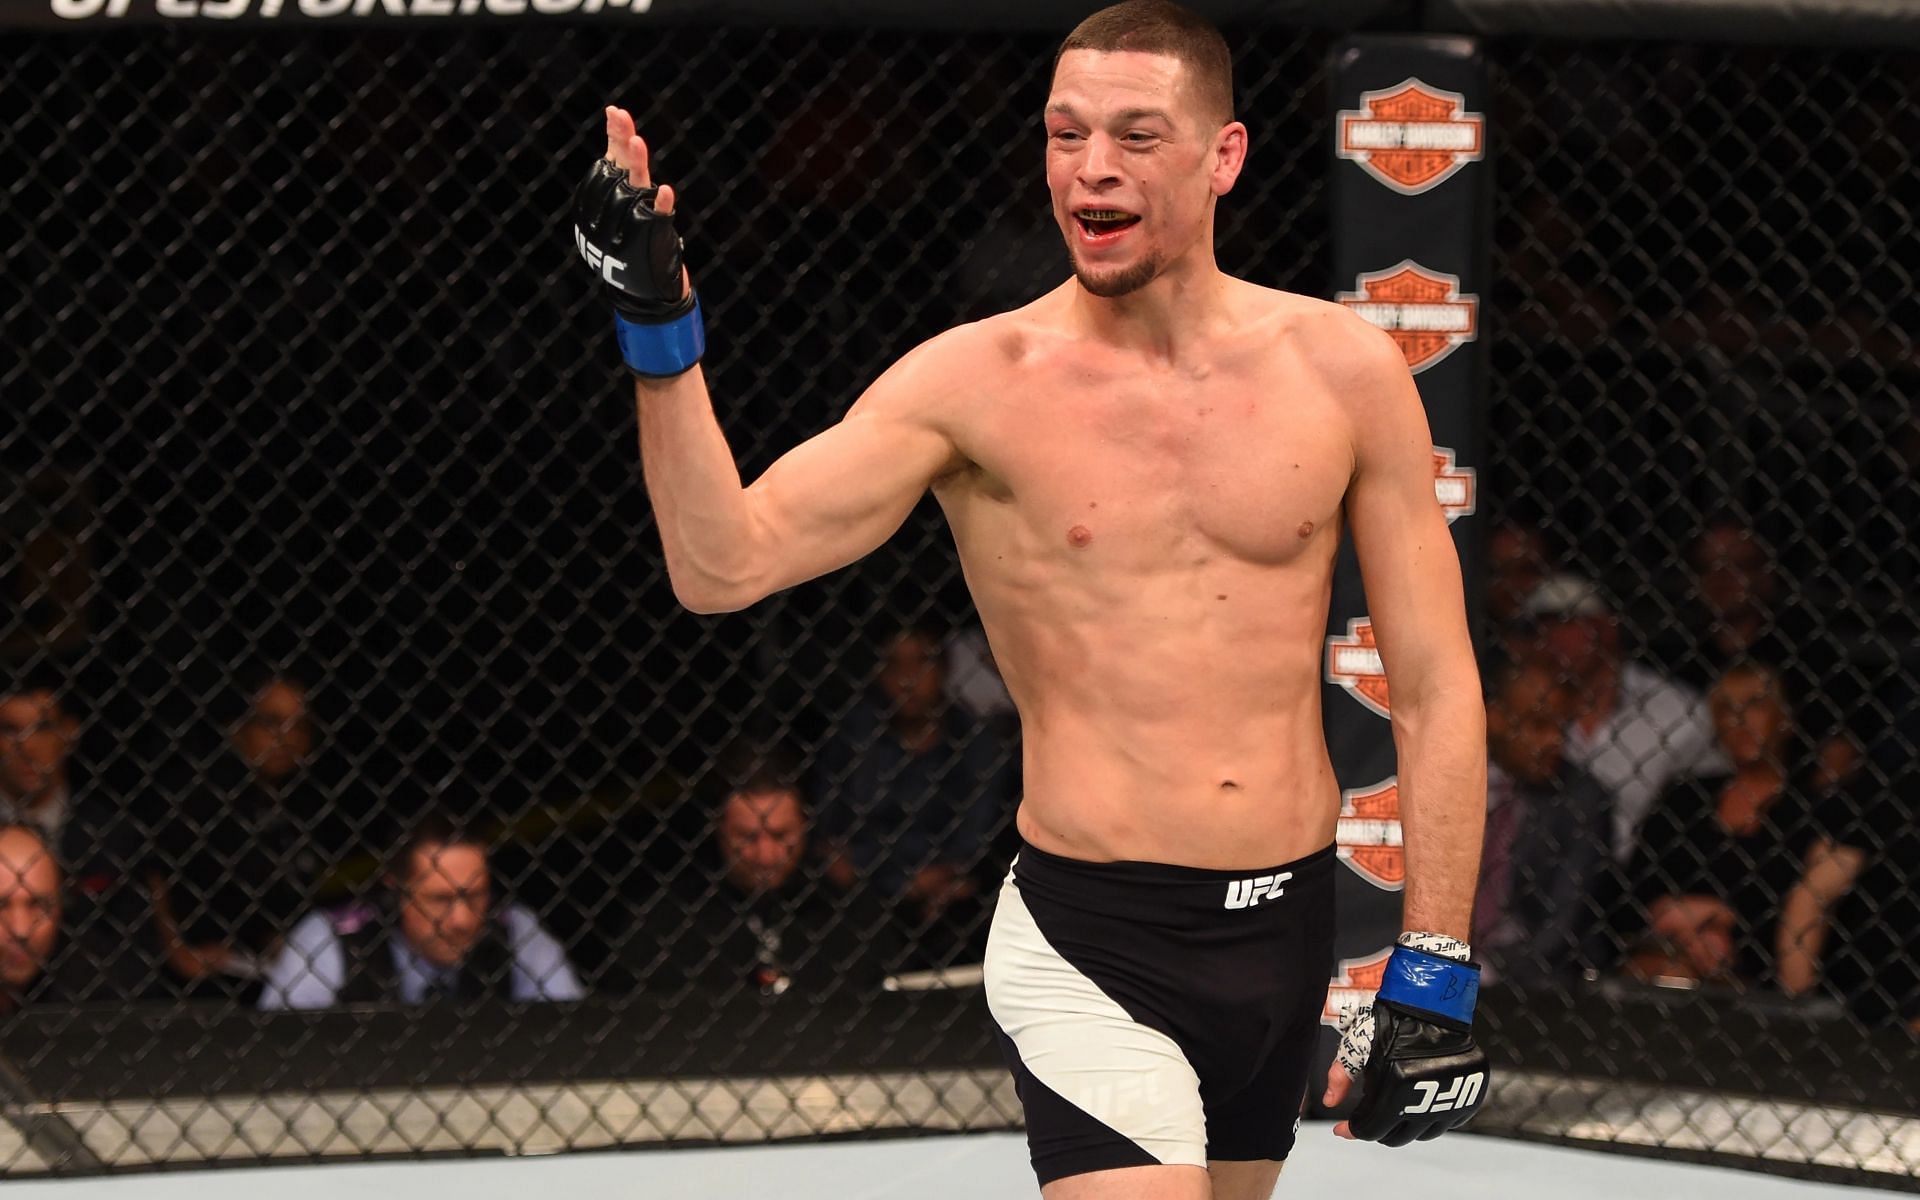 Nate Diaz has recently taken to social media to demand his release from the UFC